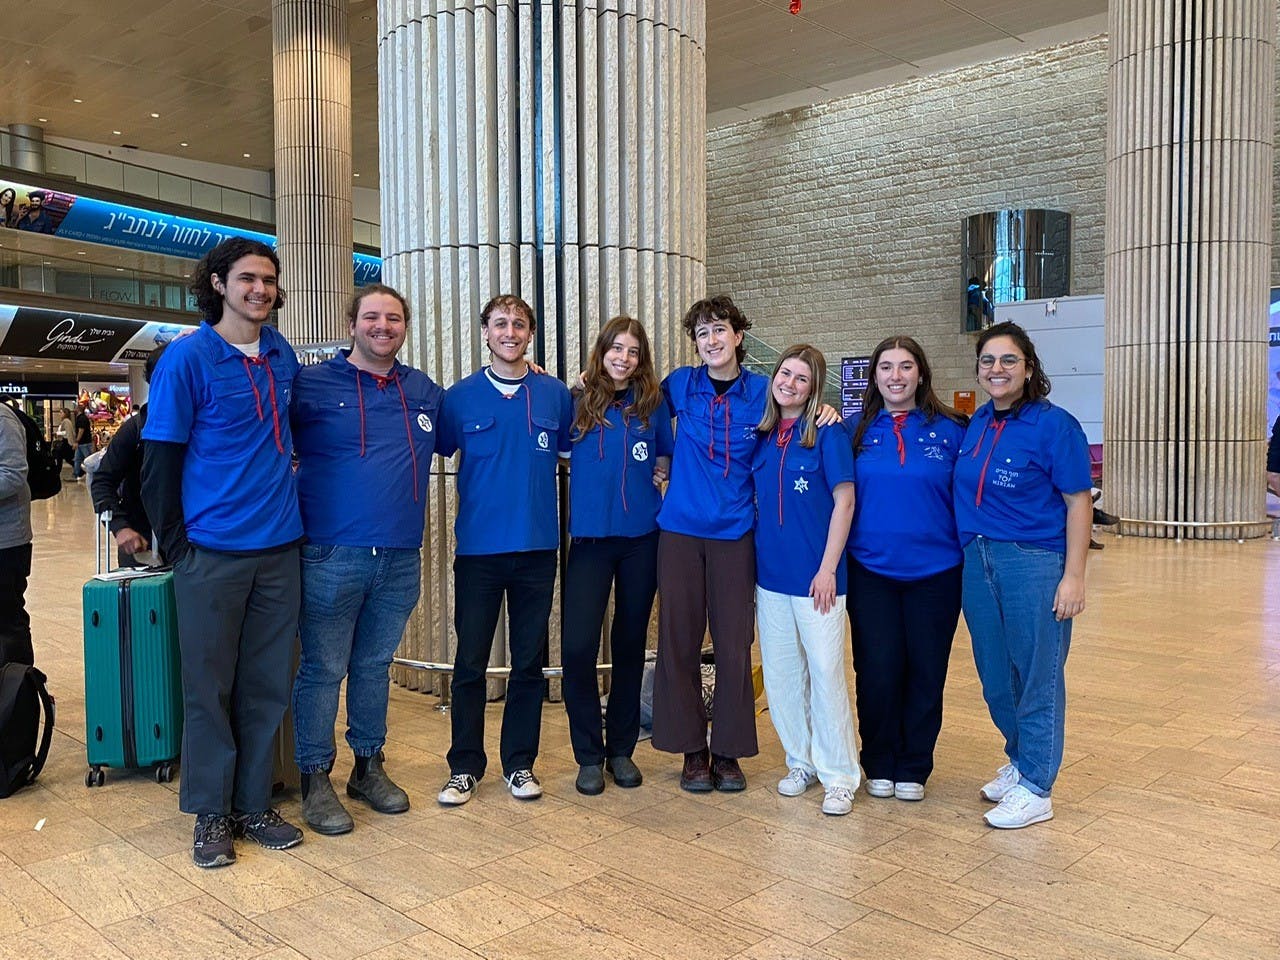 Hannah in a blue Habonim Dror top with other people making aliyah at the airport